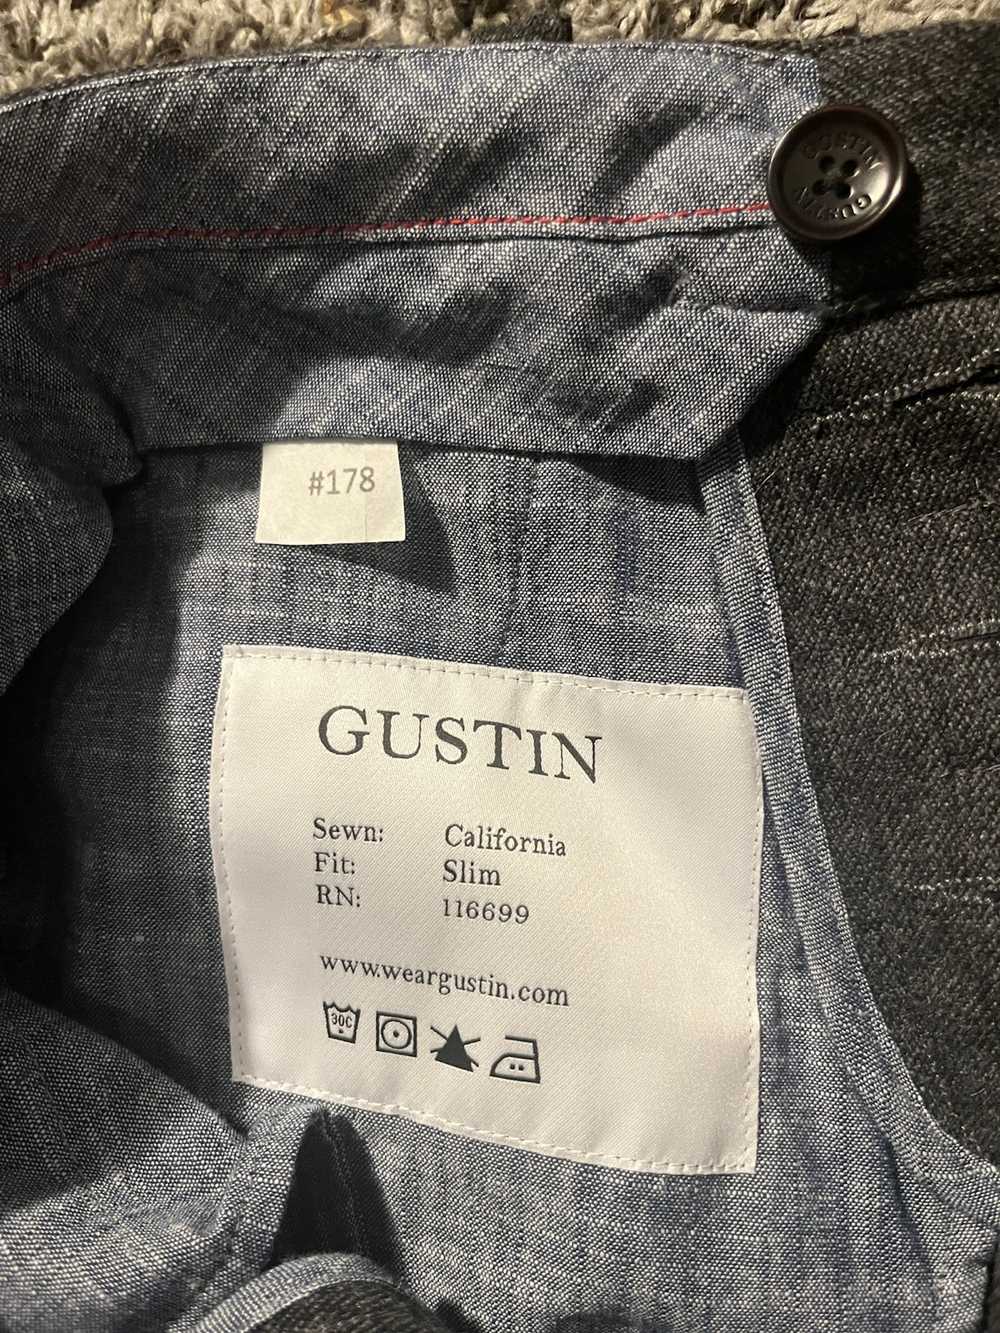 Gustin GUSTIN trousers - image 4